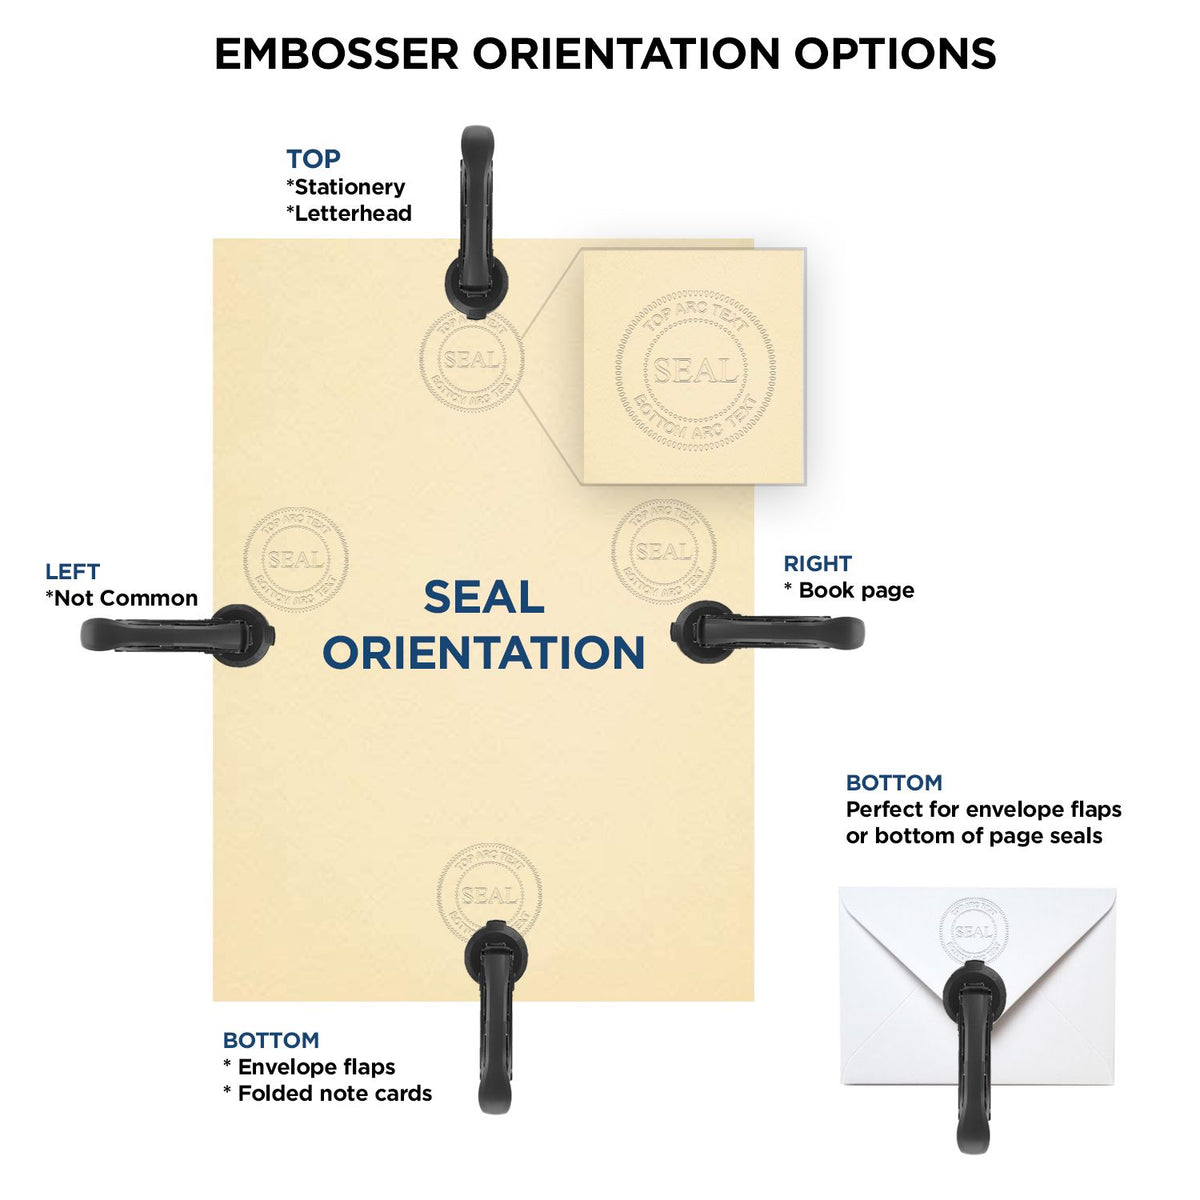 An infographic for the State of Florida Soft Land Surveyor Embossing Seal showing embosser orientation, this is showing examples of a top, bottom, right and left insert.